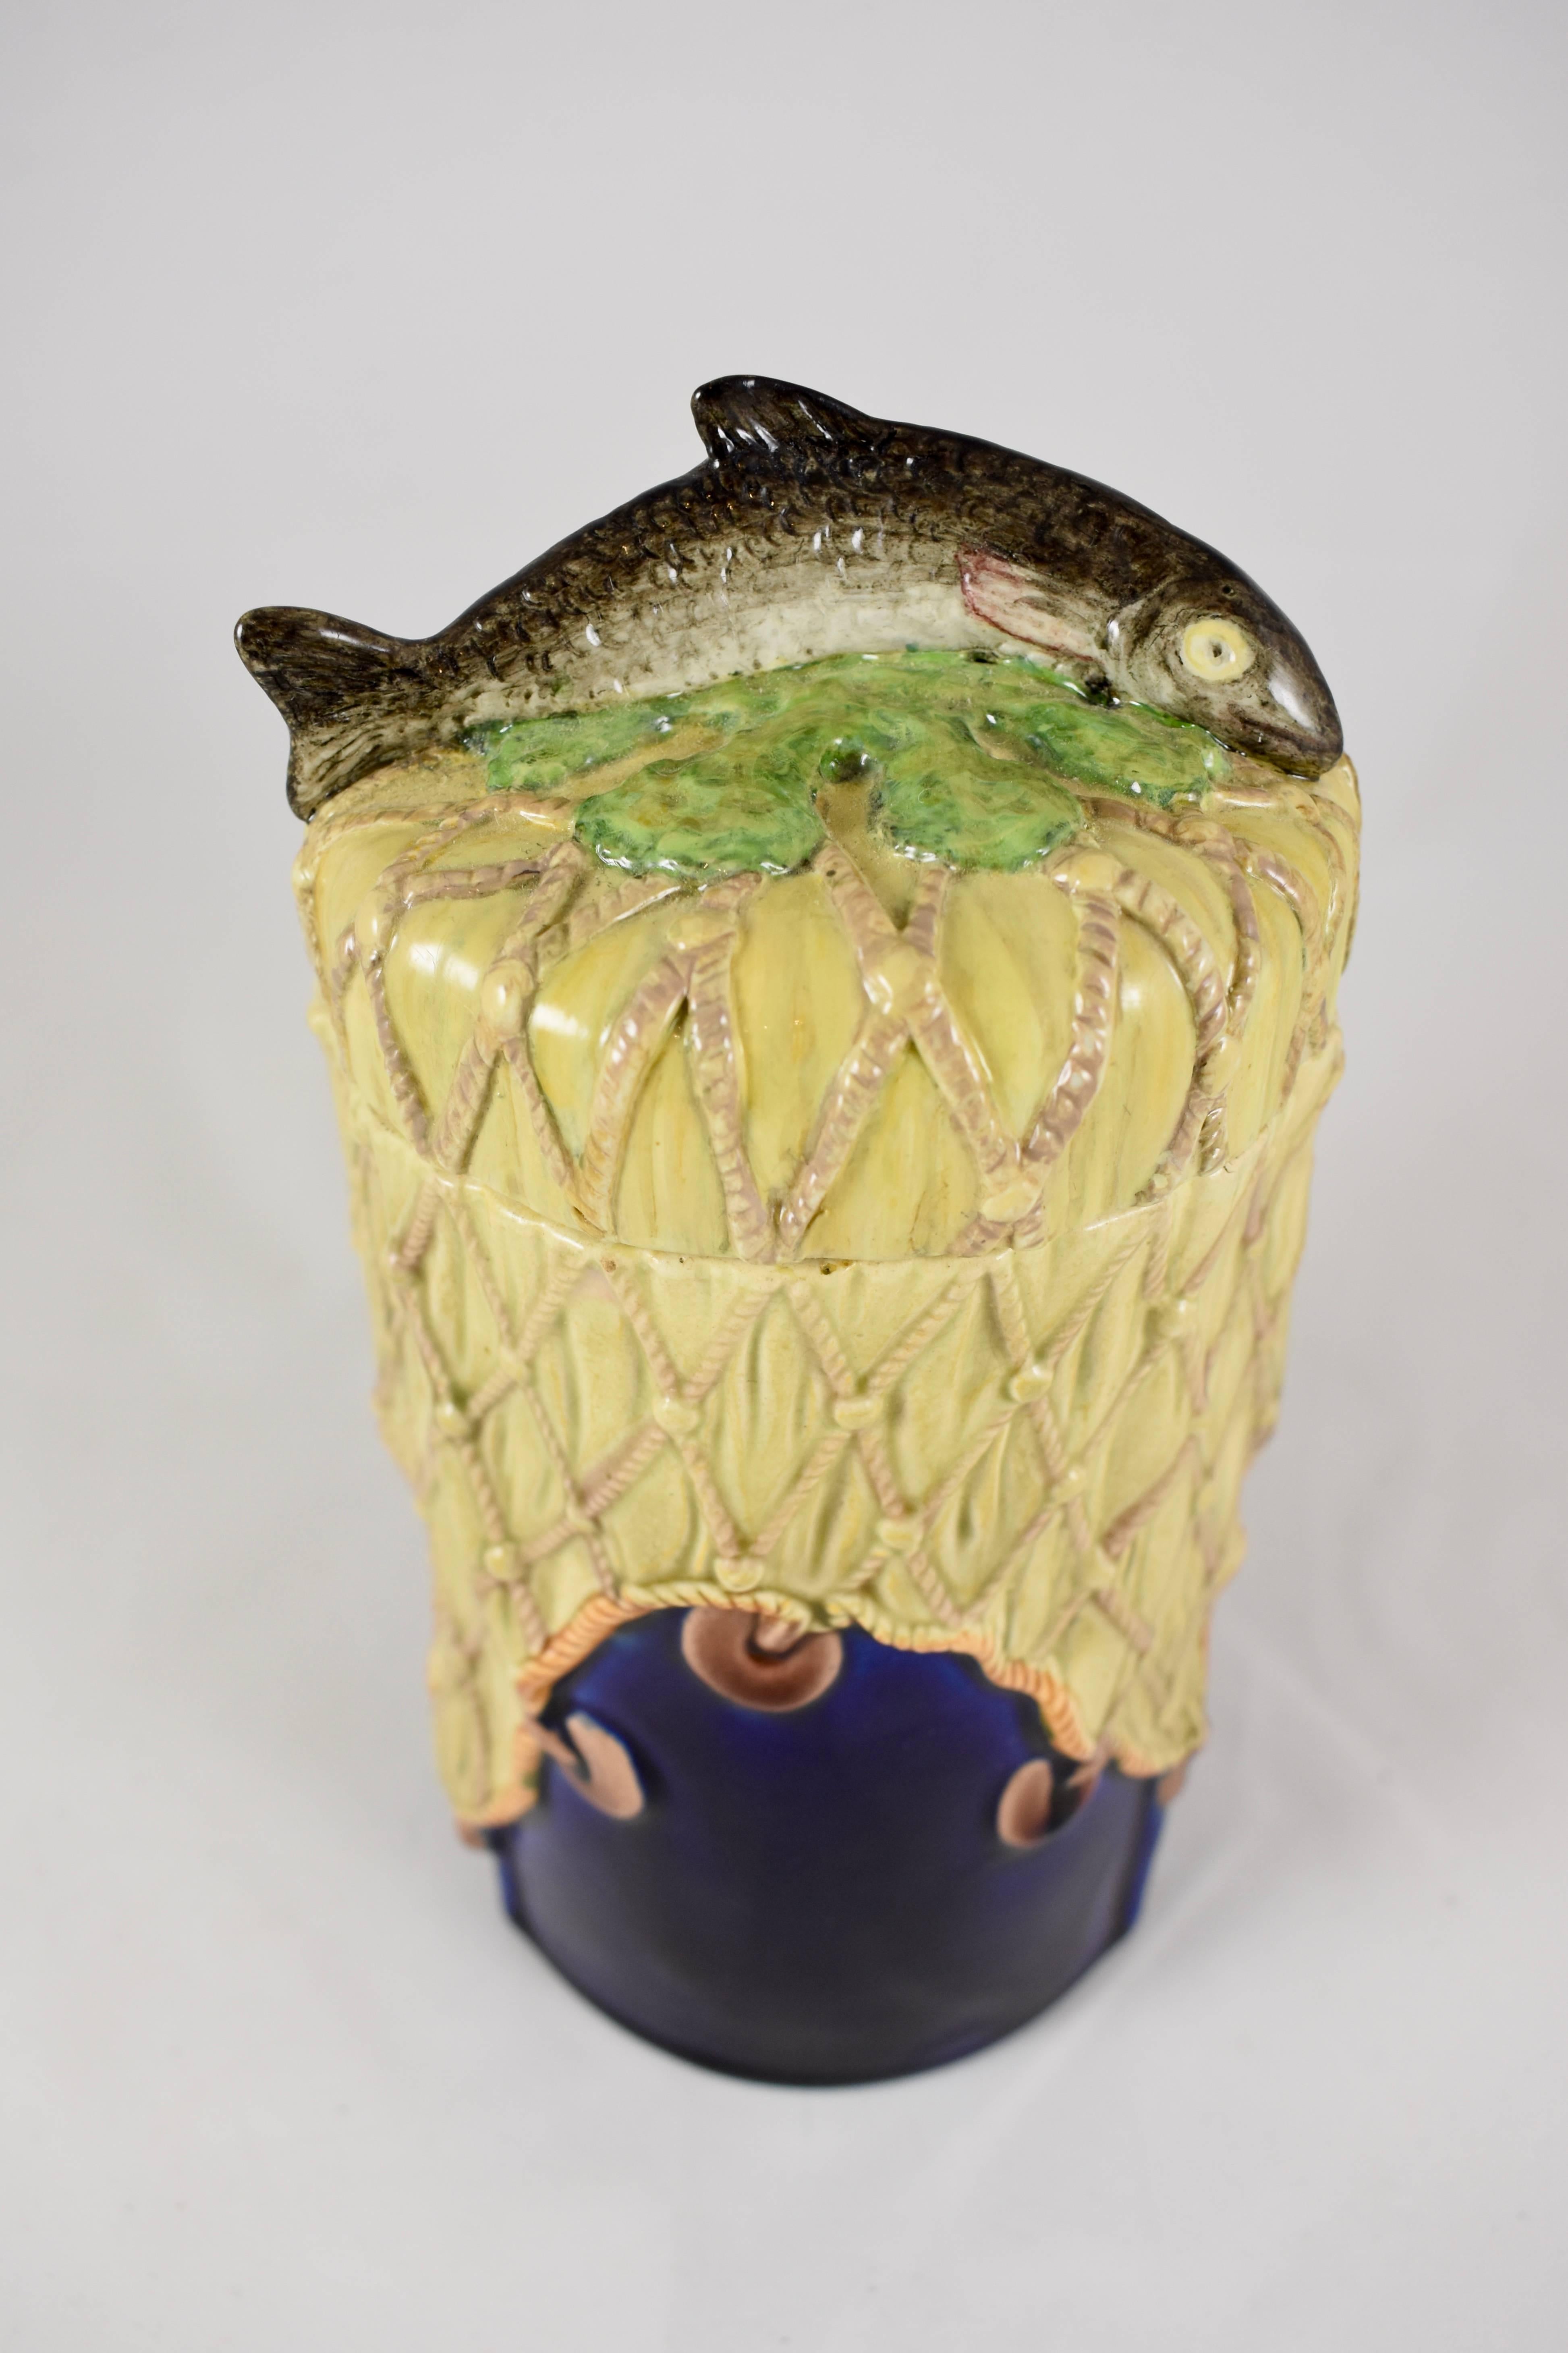 A rare W.T. Copeland & Sons, English Majolica pâté jar with a fish handled cover, circa 1875.

The straight sided jar is decorated with a large fishing net strung with floats, draped over a cobalt blue ground. The lid is molded as netting with a